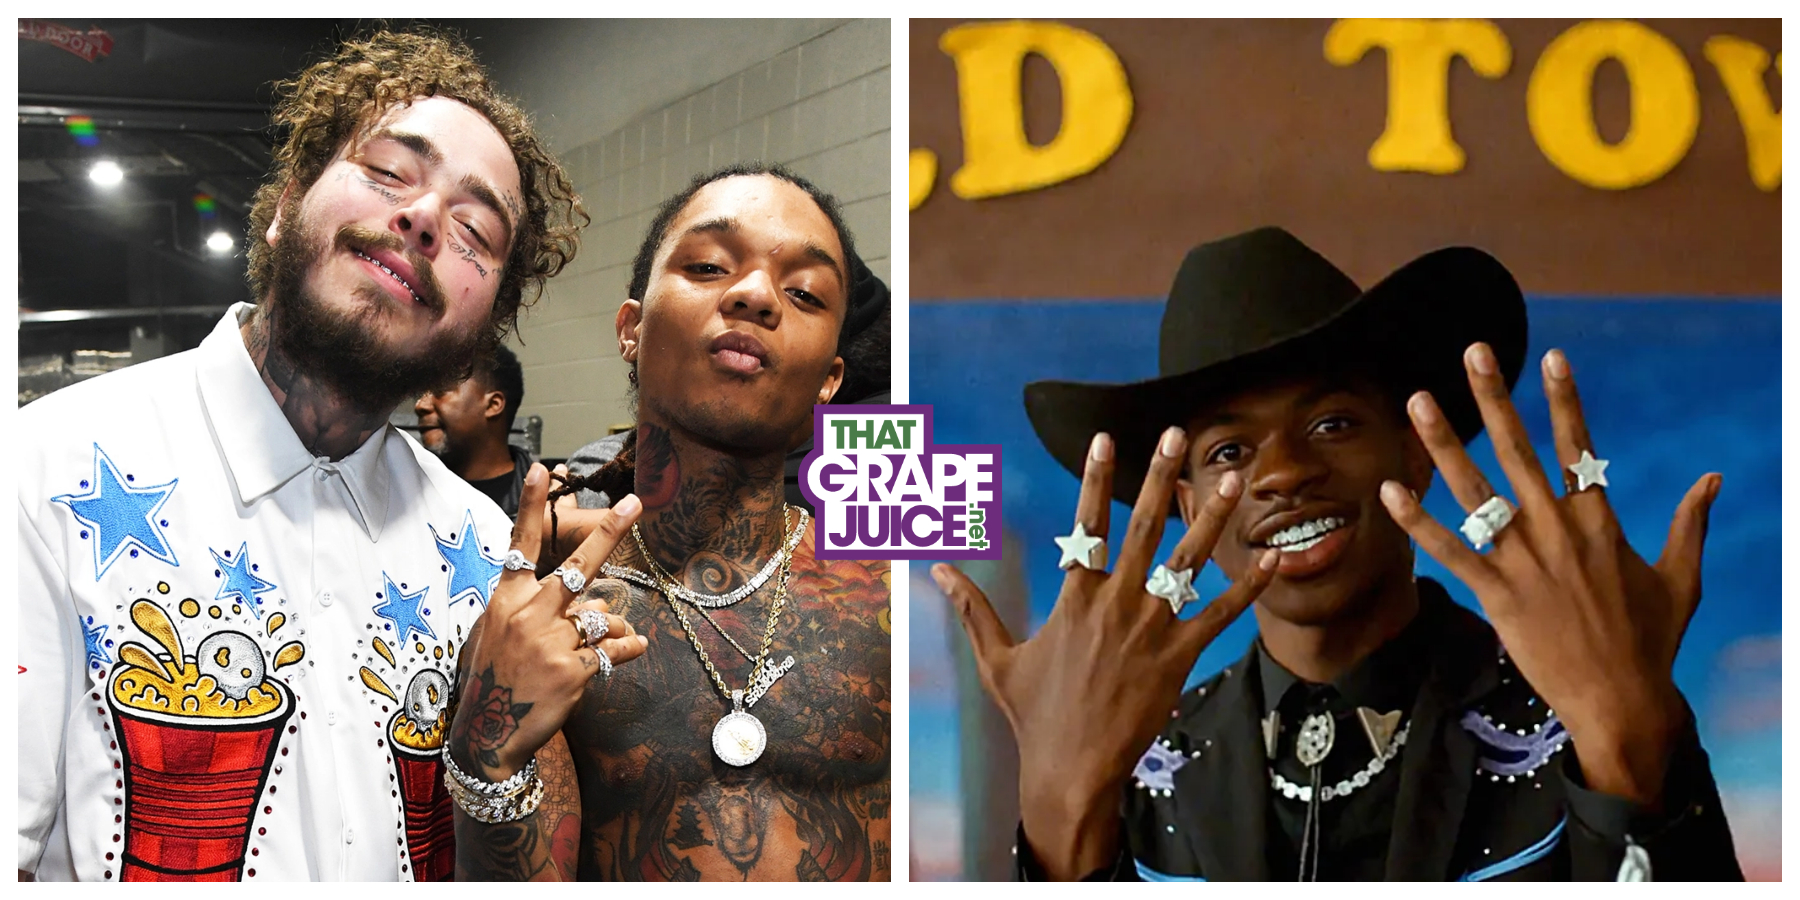 RIAA: Post Malone & Swae Lee’s ‘Sunflower’ Passes Lil Nas X’s ‘Old Town Road’ To Become Highest-Certified Song in History